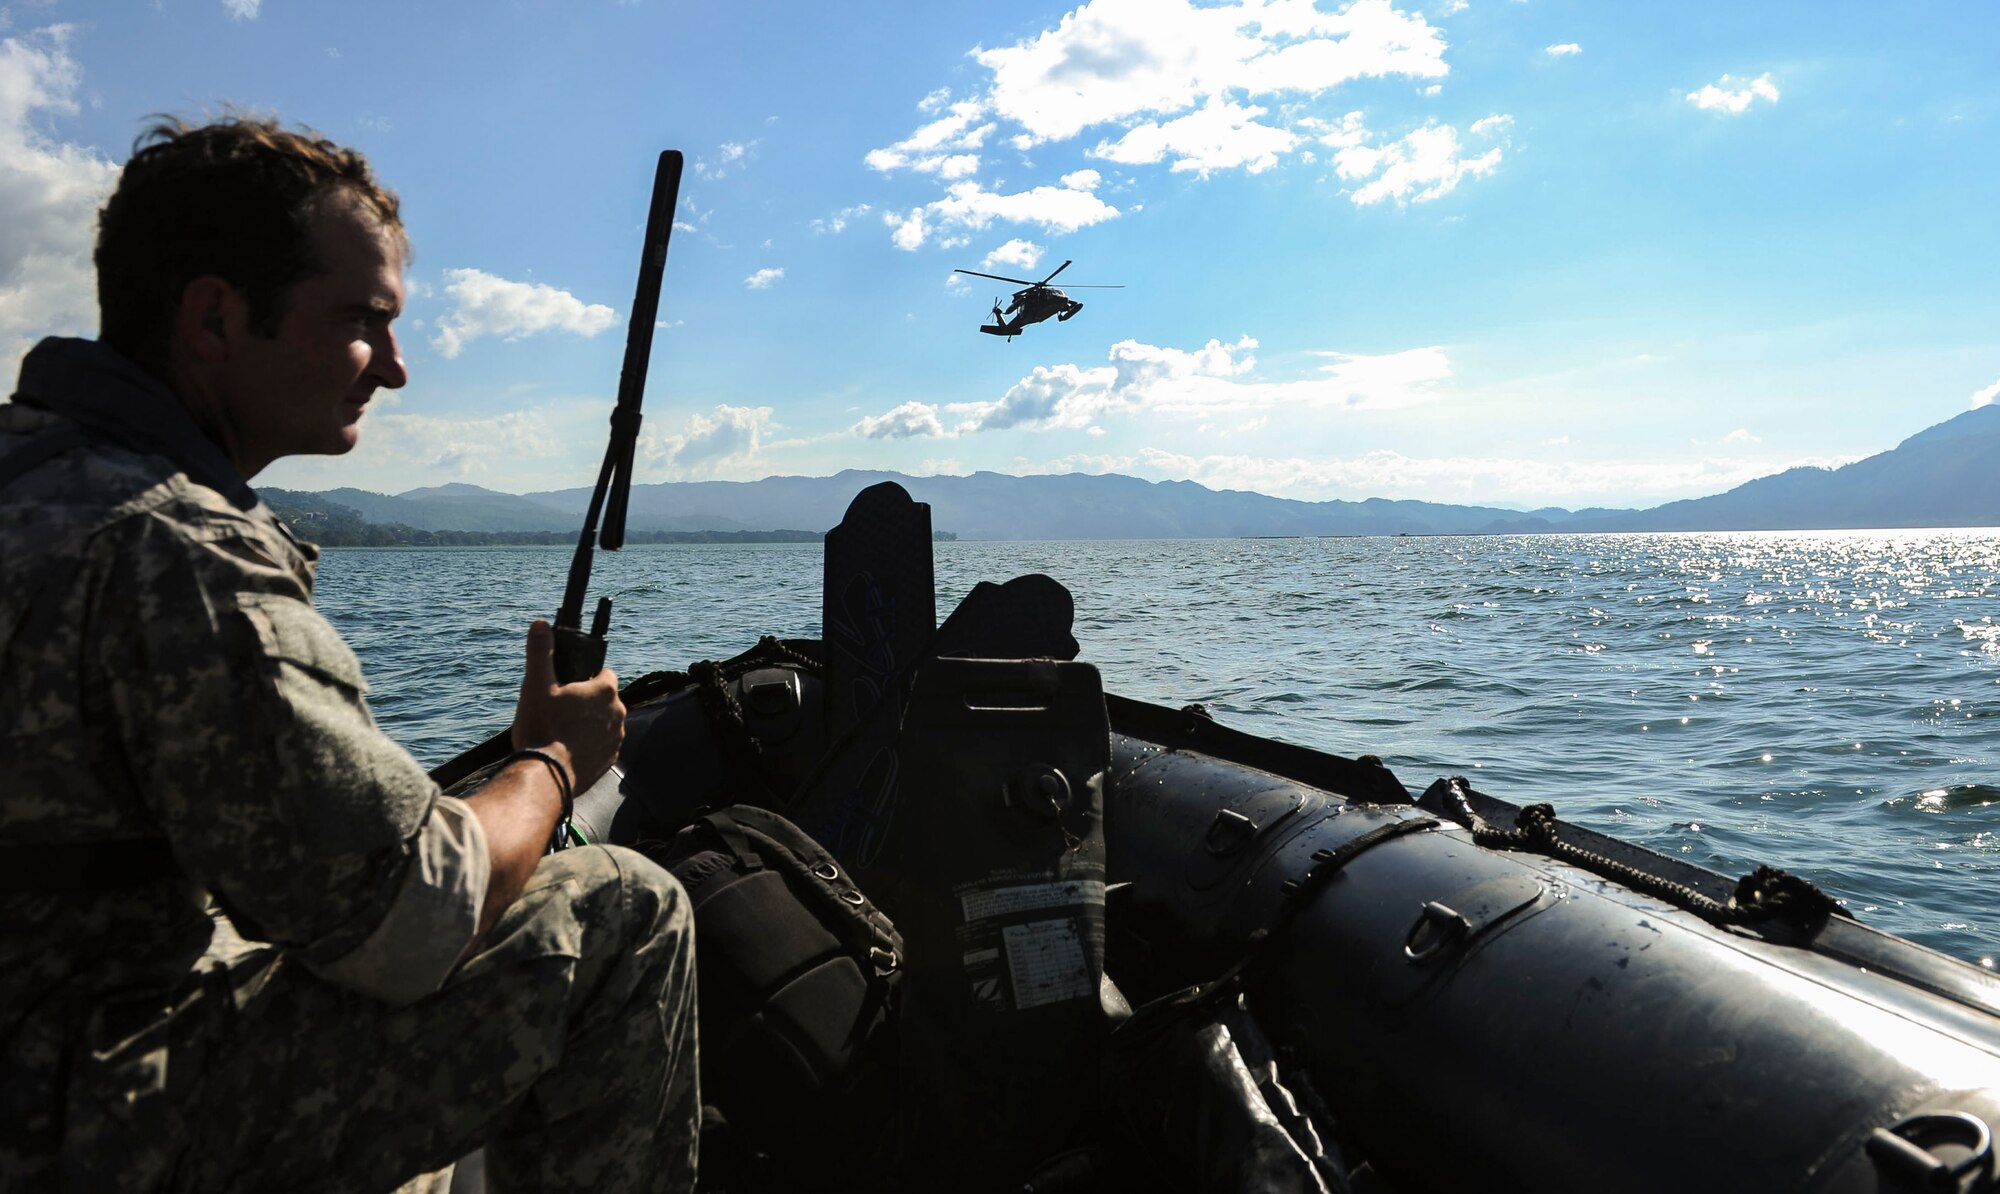 A member of U.S. Army Special Operations Forces communicates with the pilots of a UH-60 Black Hawk helicopter assigned to the 1-228th Aviation Battalion during hoist training at Lake Yojoa, Honduras, Jan. 22, 2015. The 1-228th Aviation Regiment partnered with U.S. Army Special Operations personnel to practice recovering live personnel. The overwater hoist training was held to ensure members of Joint Task Force-Bravo are planning and preparing for crisis and contingency response, as well as countering transnational organized crime, and counterterrorism operations as part of U.S. Southern Command’s mission. Contingency planning prepares the command for various scenarios that pose the greatest probability of challenging our regional partners or threatening our national interests. (U.S. Air Force photo/Tech. Sgt. Keola Soon)